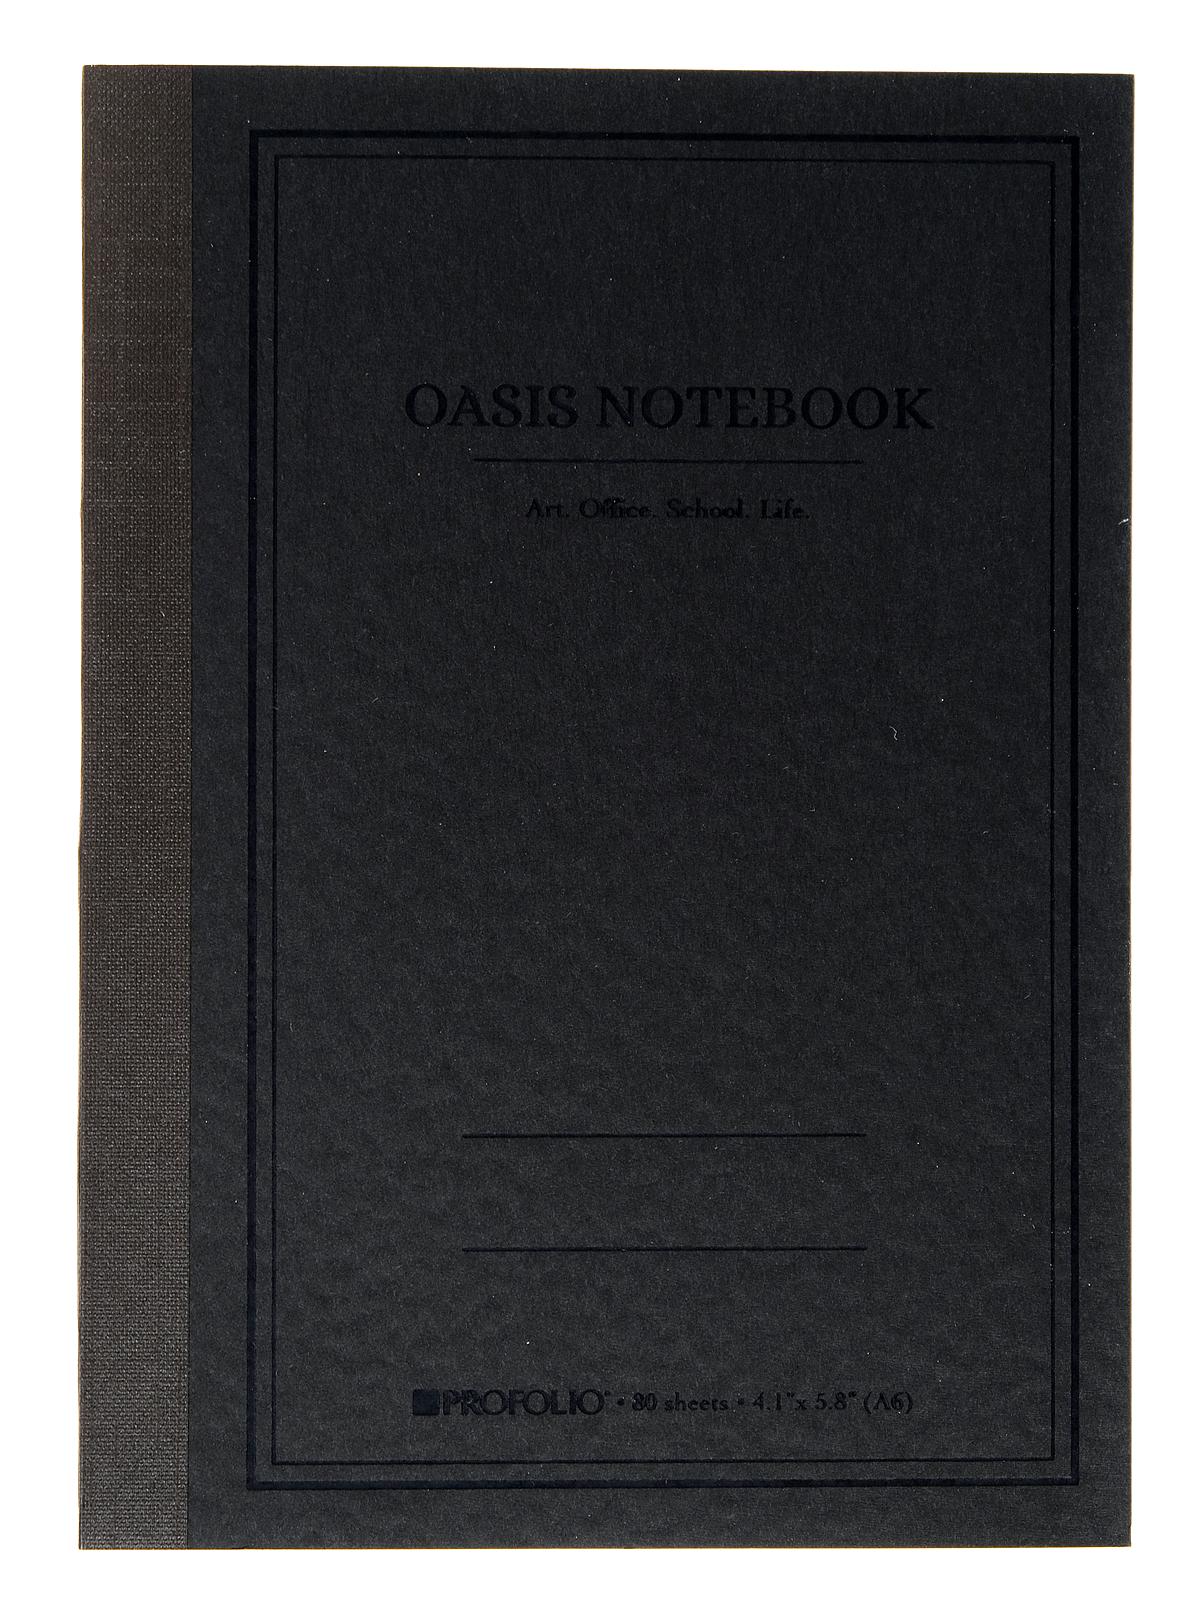 Profolio Oasis Notebook A6 4.1 In. X 5.8 In. Charcoal 80 Sheets